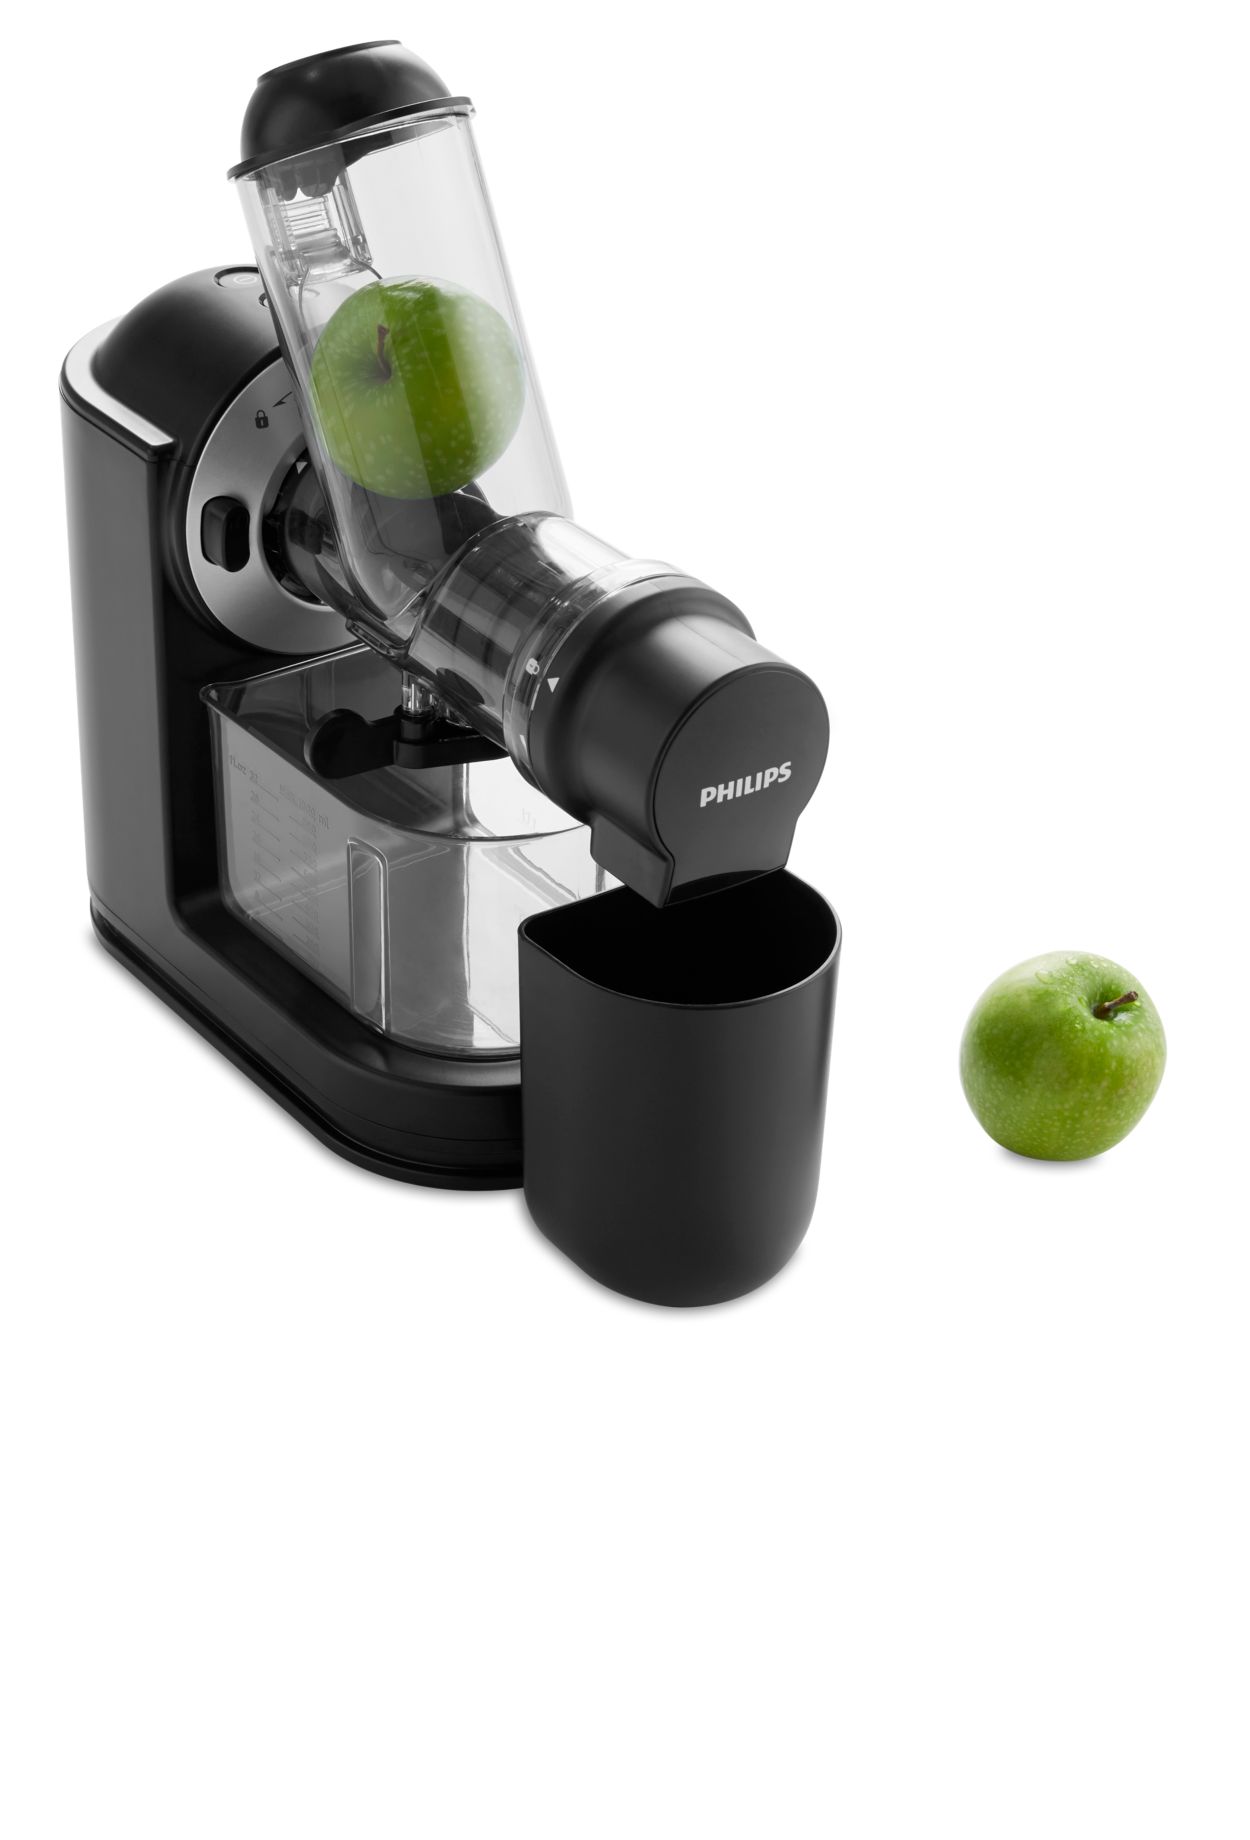 Philips Collection Slow | HR1889/70 Juicer Viva